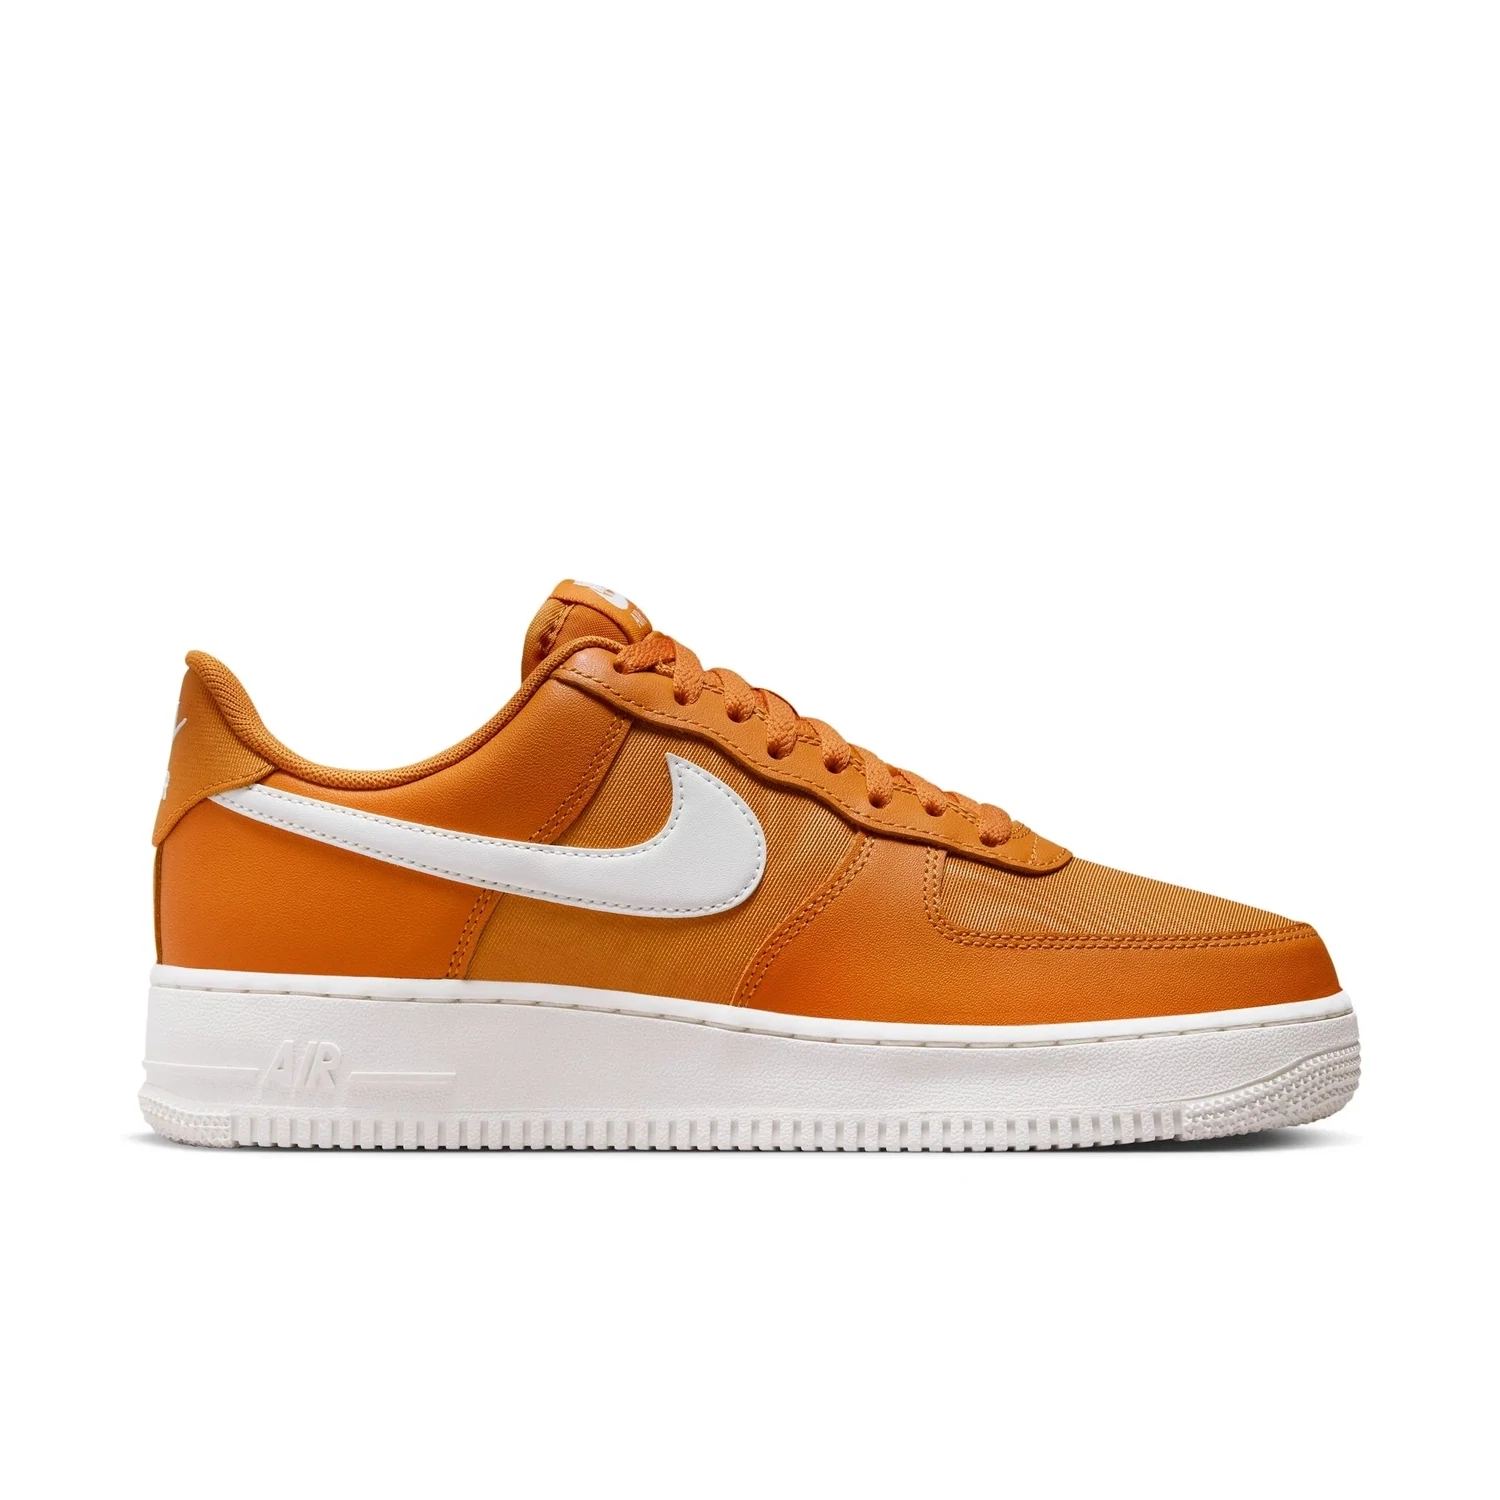 Nike Air Force 1 '07 LV8 In Monarch